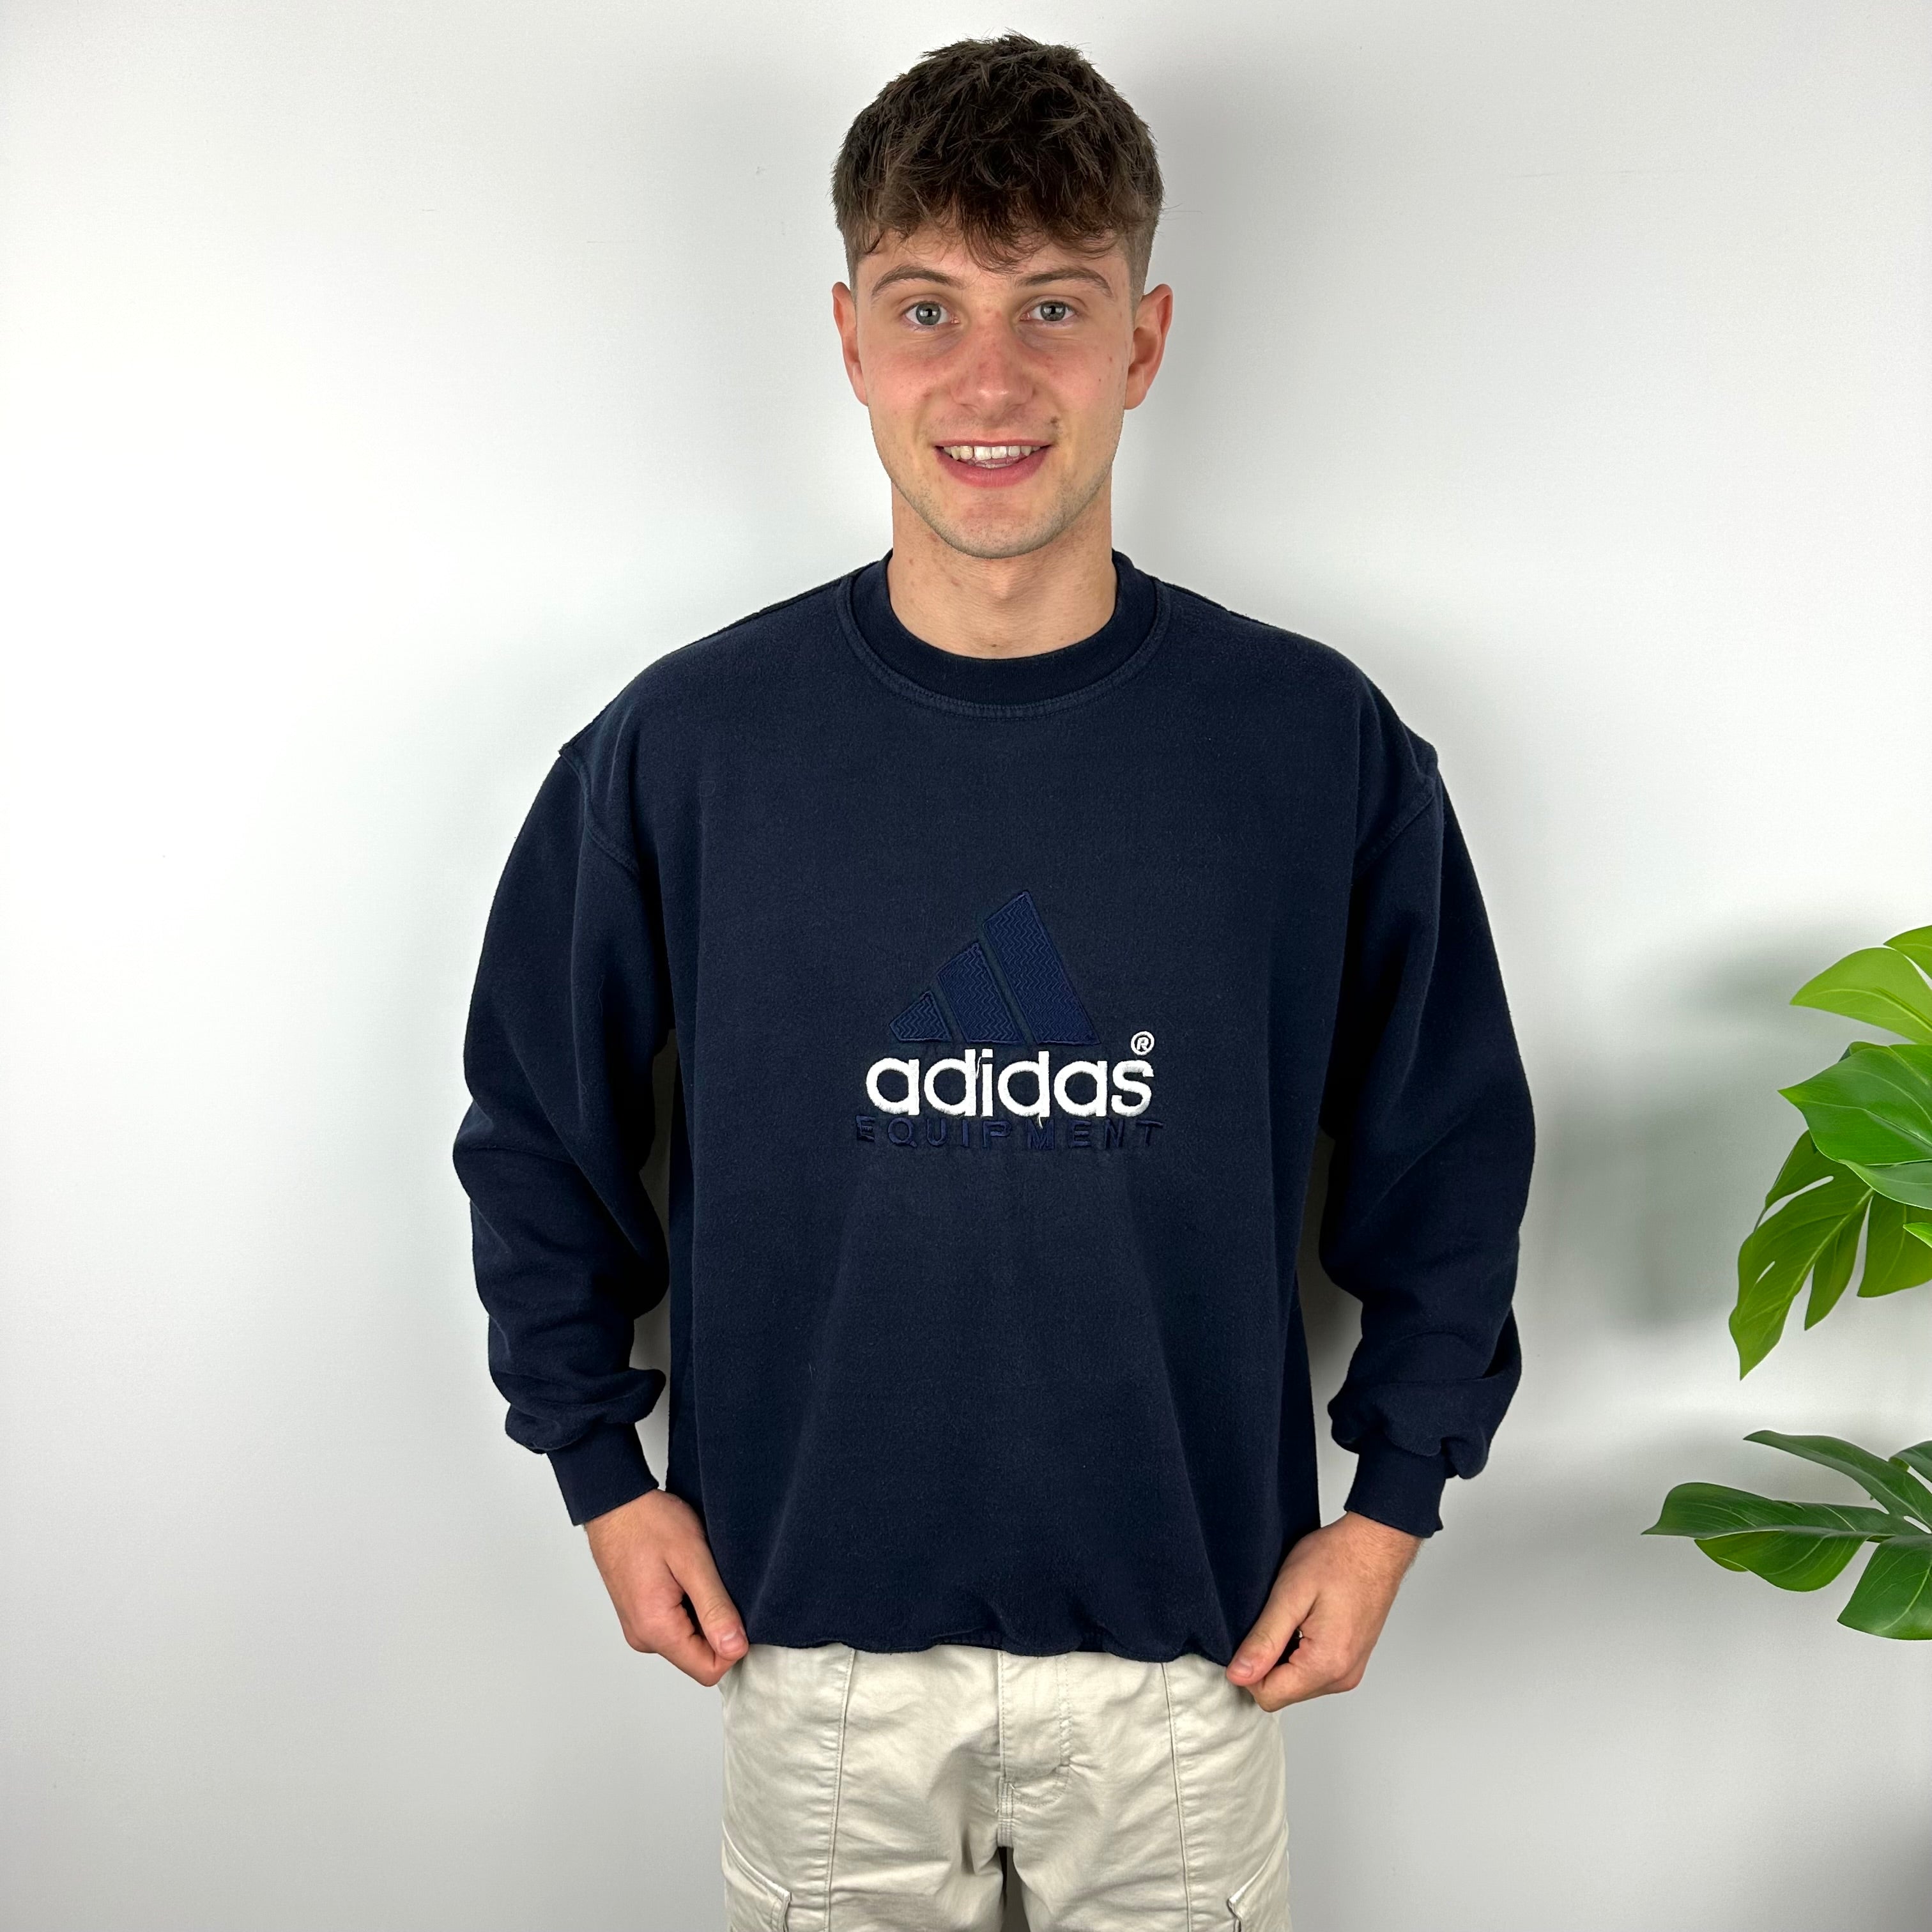 Adidas Equipment RARE Navy Embroidered Spell Out Sweatshirt (M)